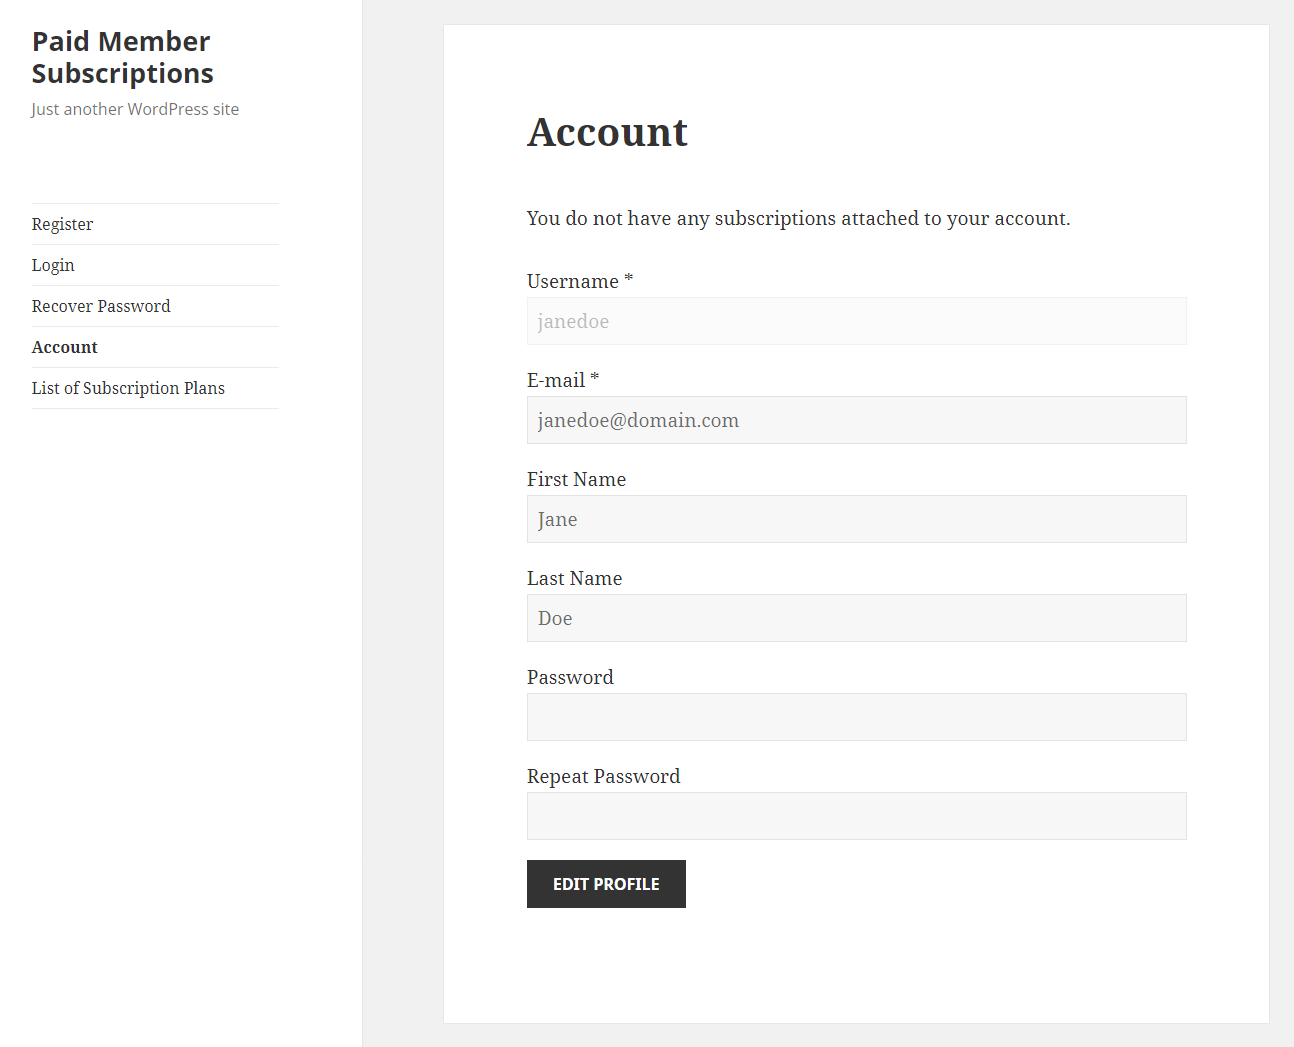 Paid Member Subscriptions Pro - Navigation Menu Filtering - Logged In Non Member